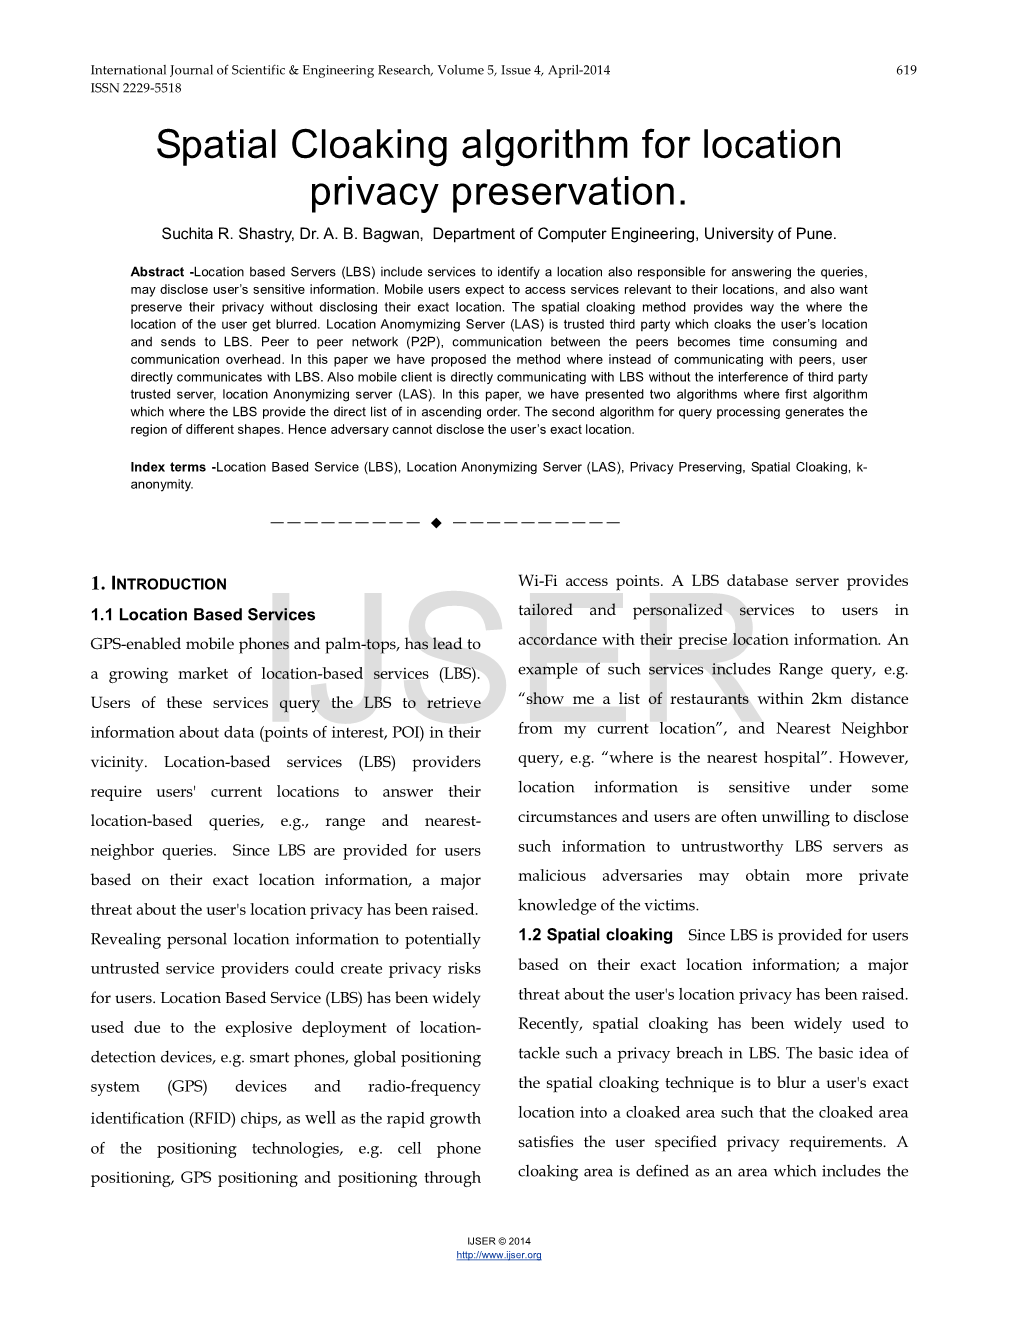 Spatial Cloaking Algorithm for Location Privacy Preservation